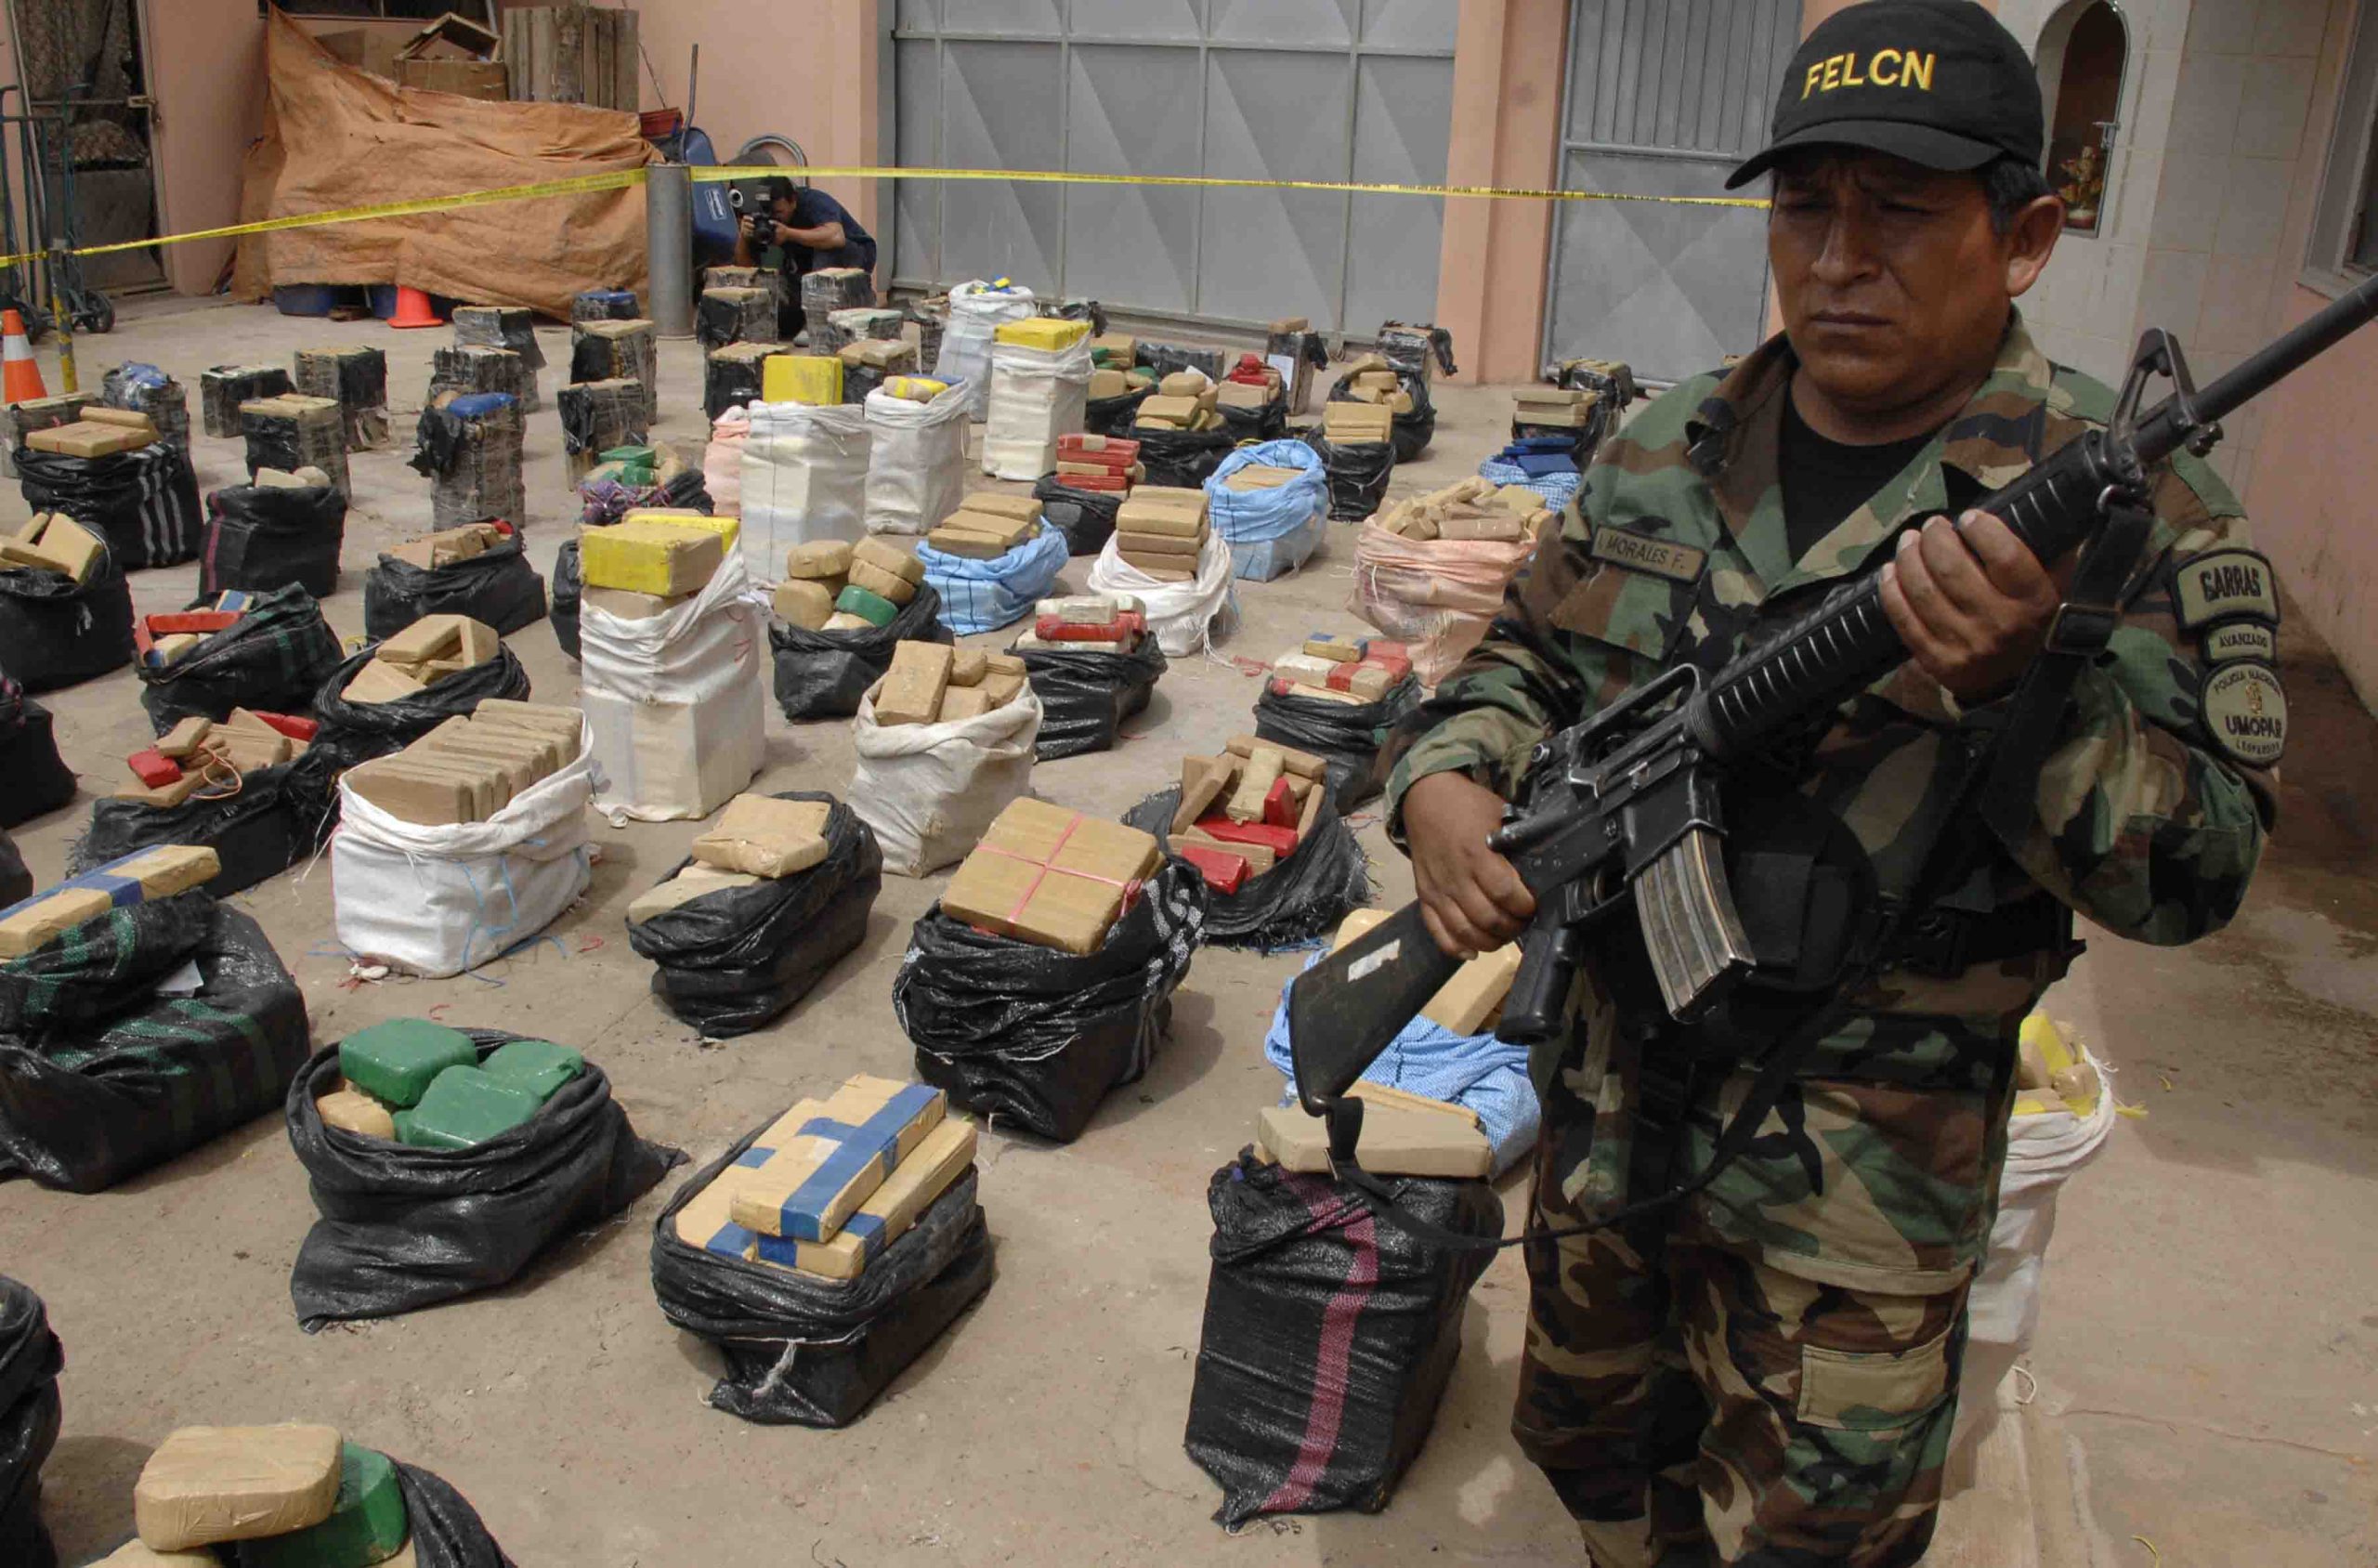 A police officer guards packages containing cocaine during a presentation to the media in Santa Cruz, Bolivia, Friday, March 19, 2010. (AP Photo)